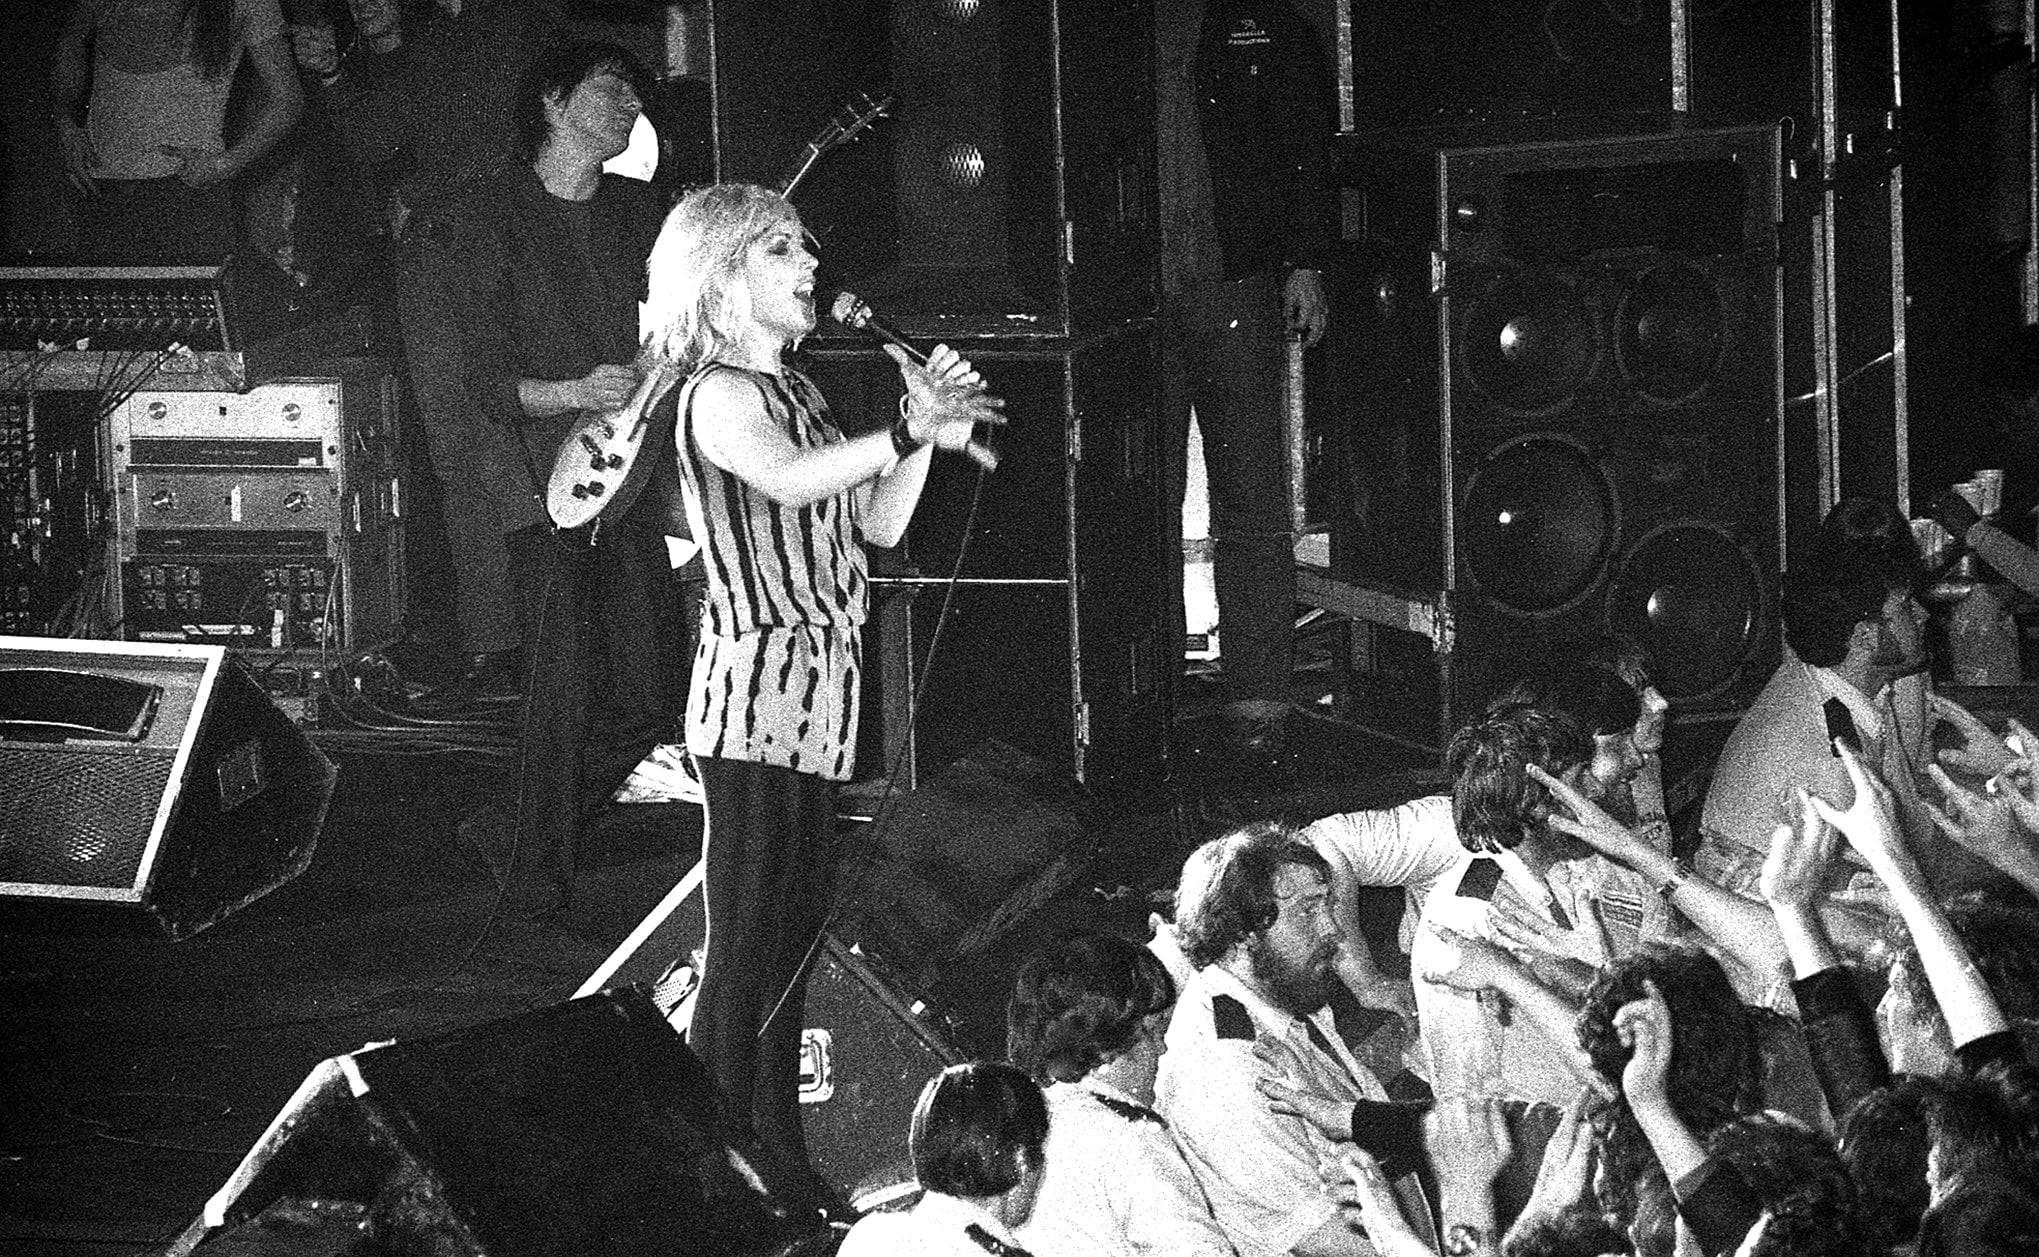 Blondie, fronted by Debbie Harry, at Deeside Leisure Centre in the 1980s.